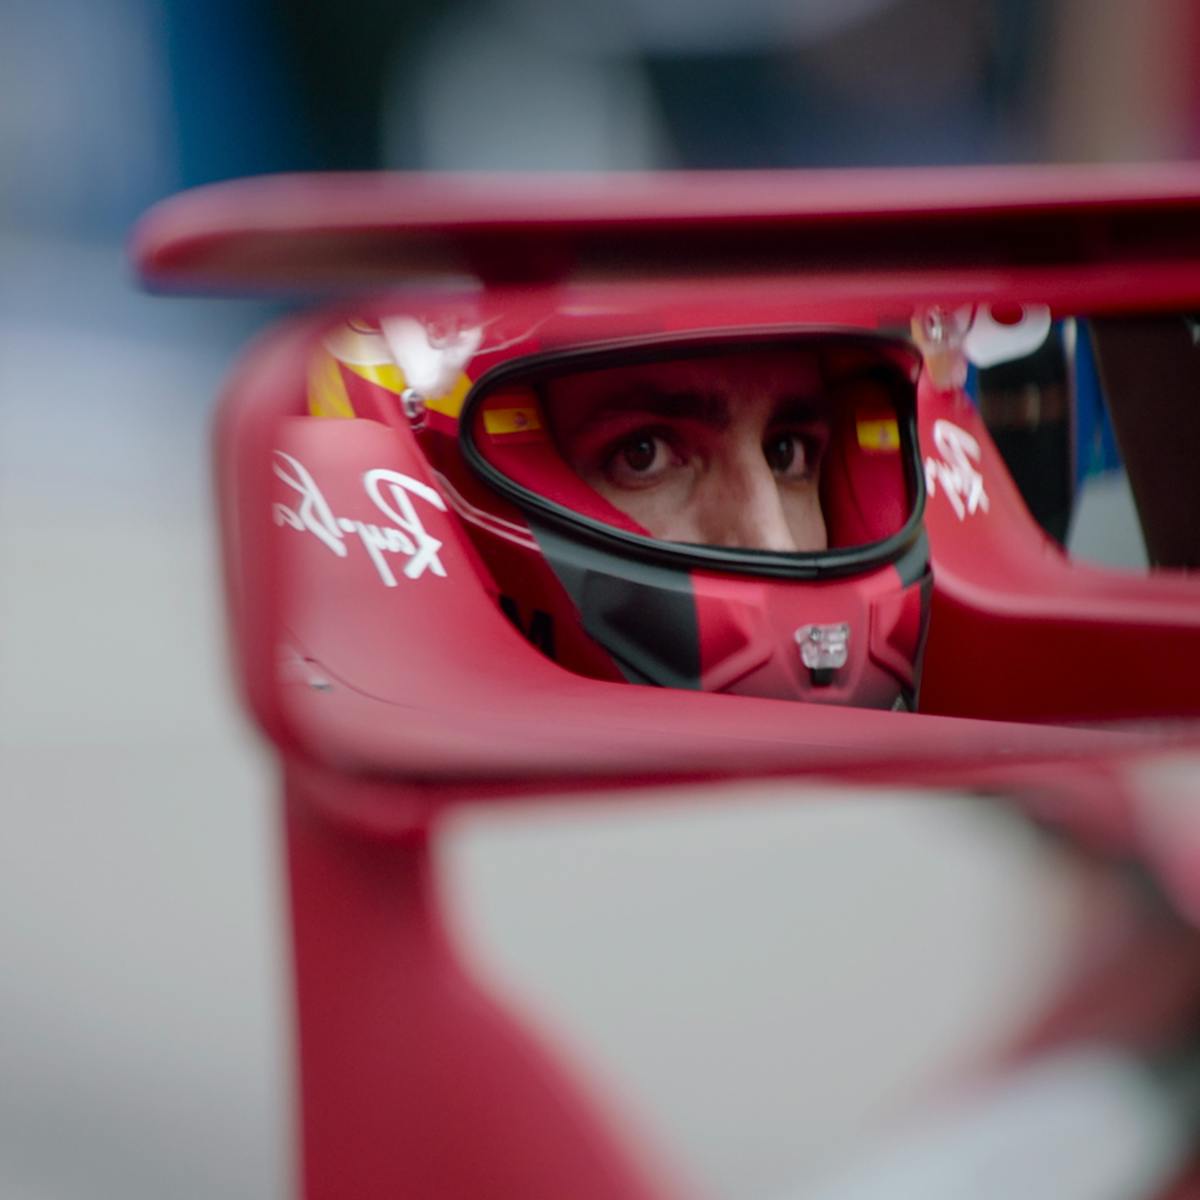 Driver Carlos Sainz Jr. sits in his red Ferrari F1 car looking into his rearview mirror.